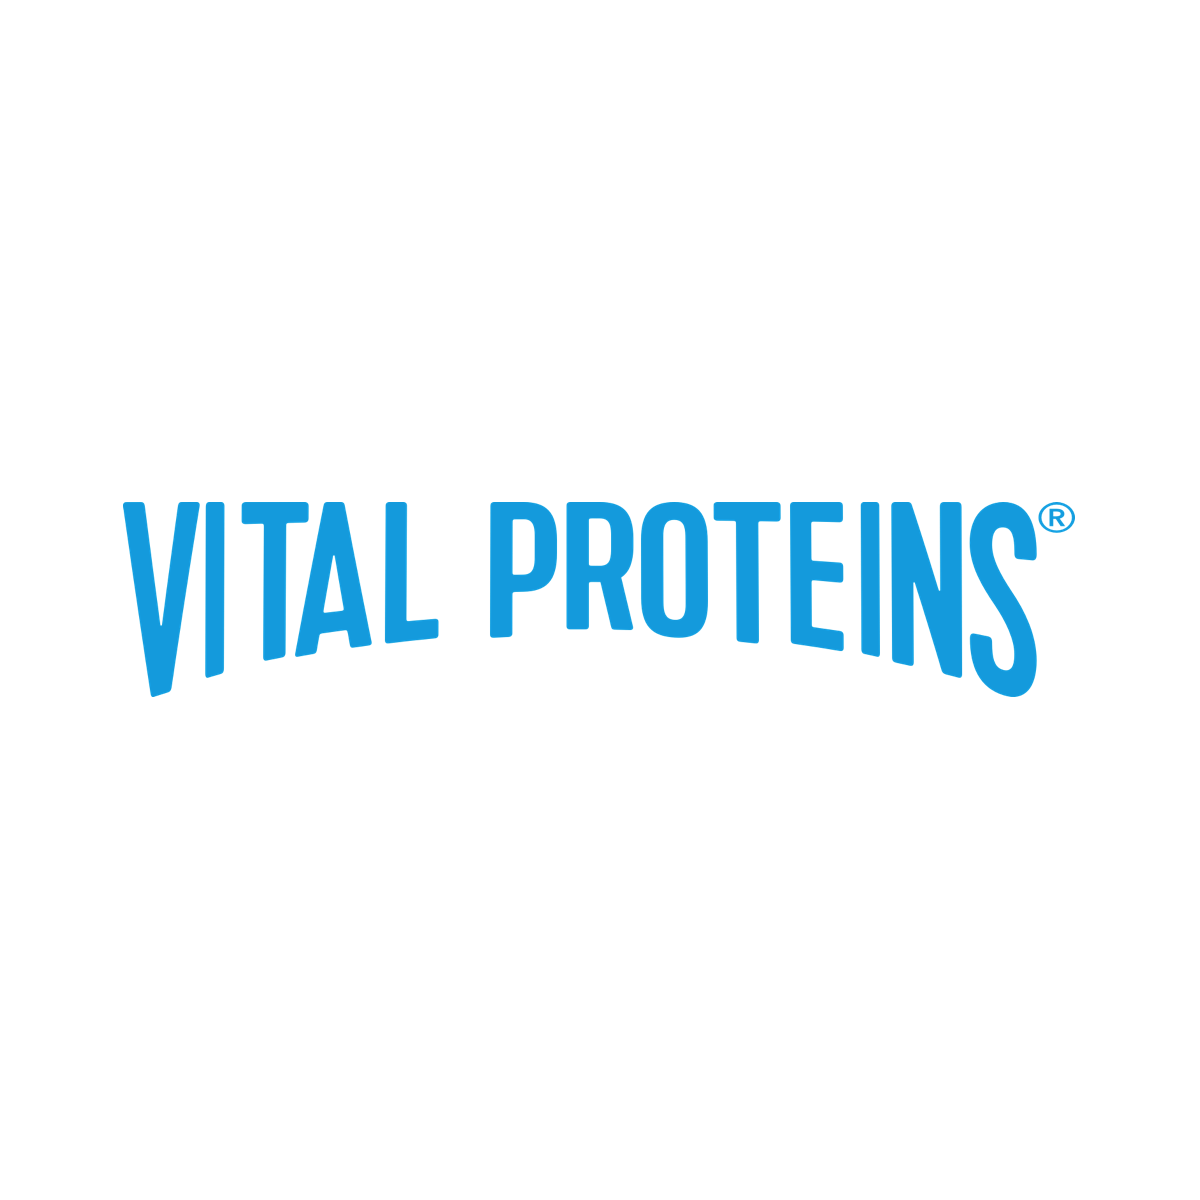 Vital Proteins Coupons & Promo Codes